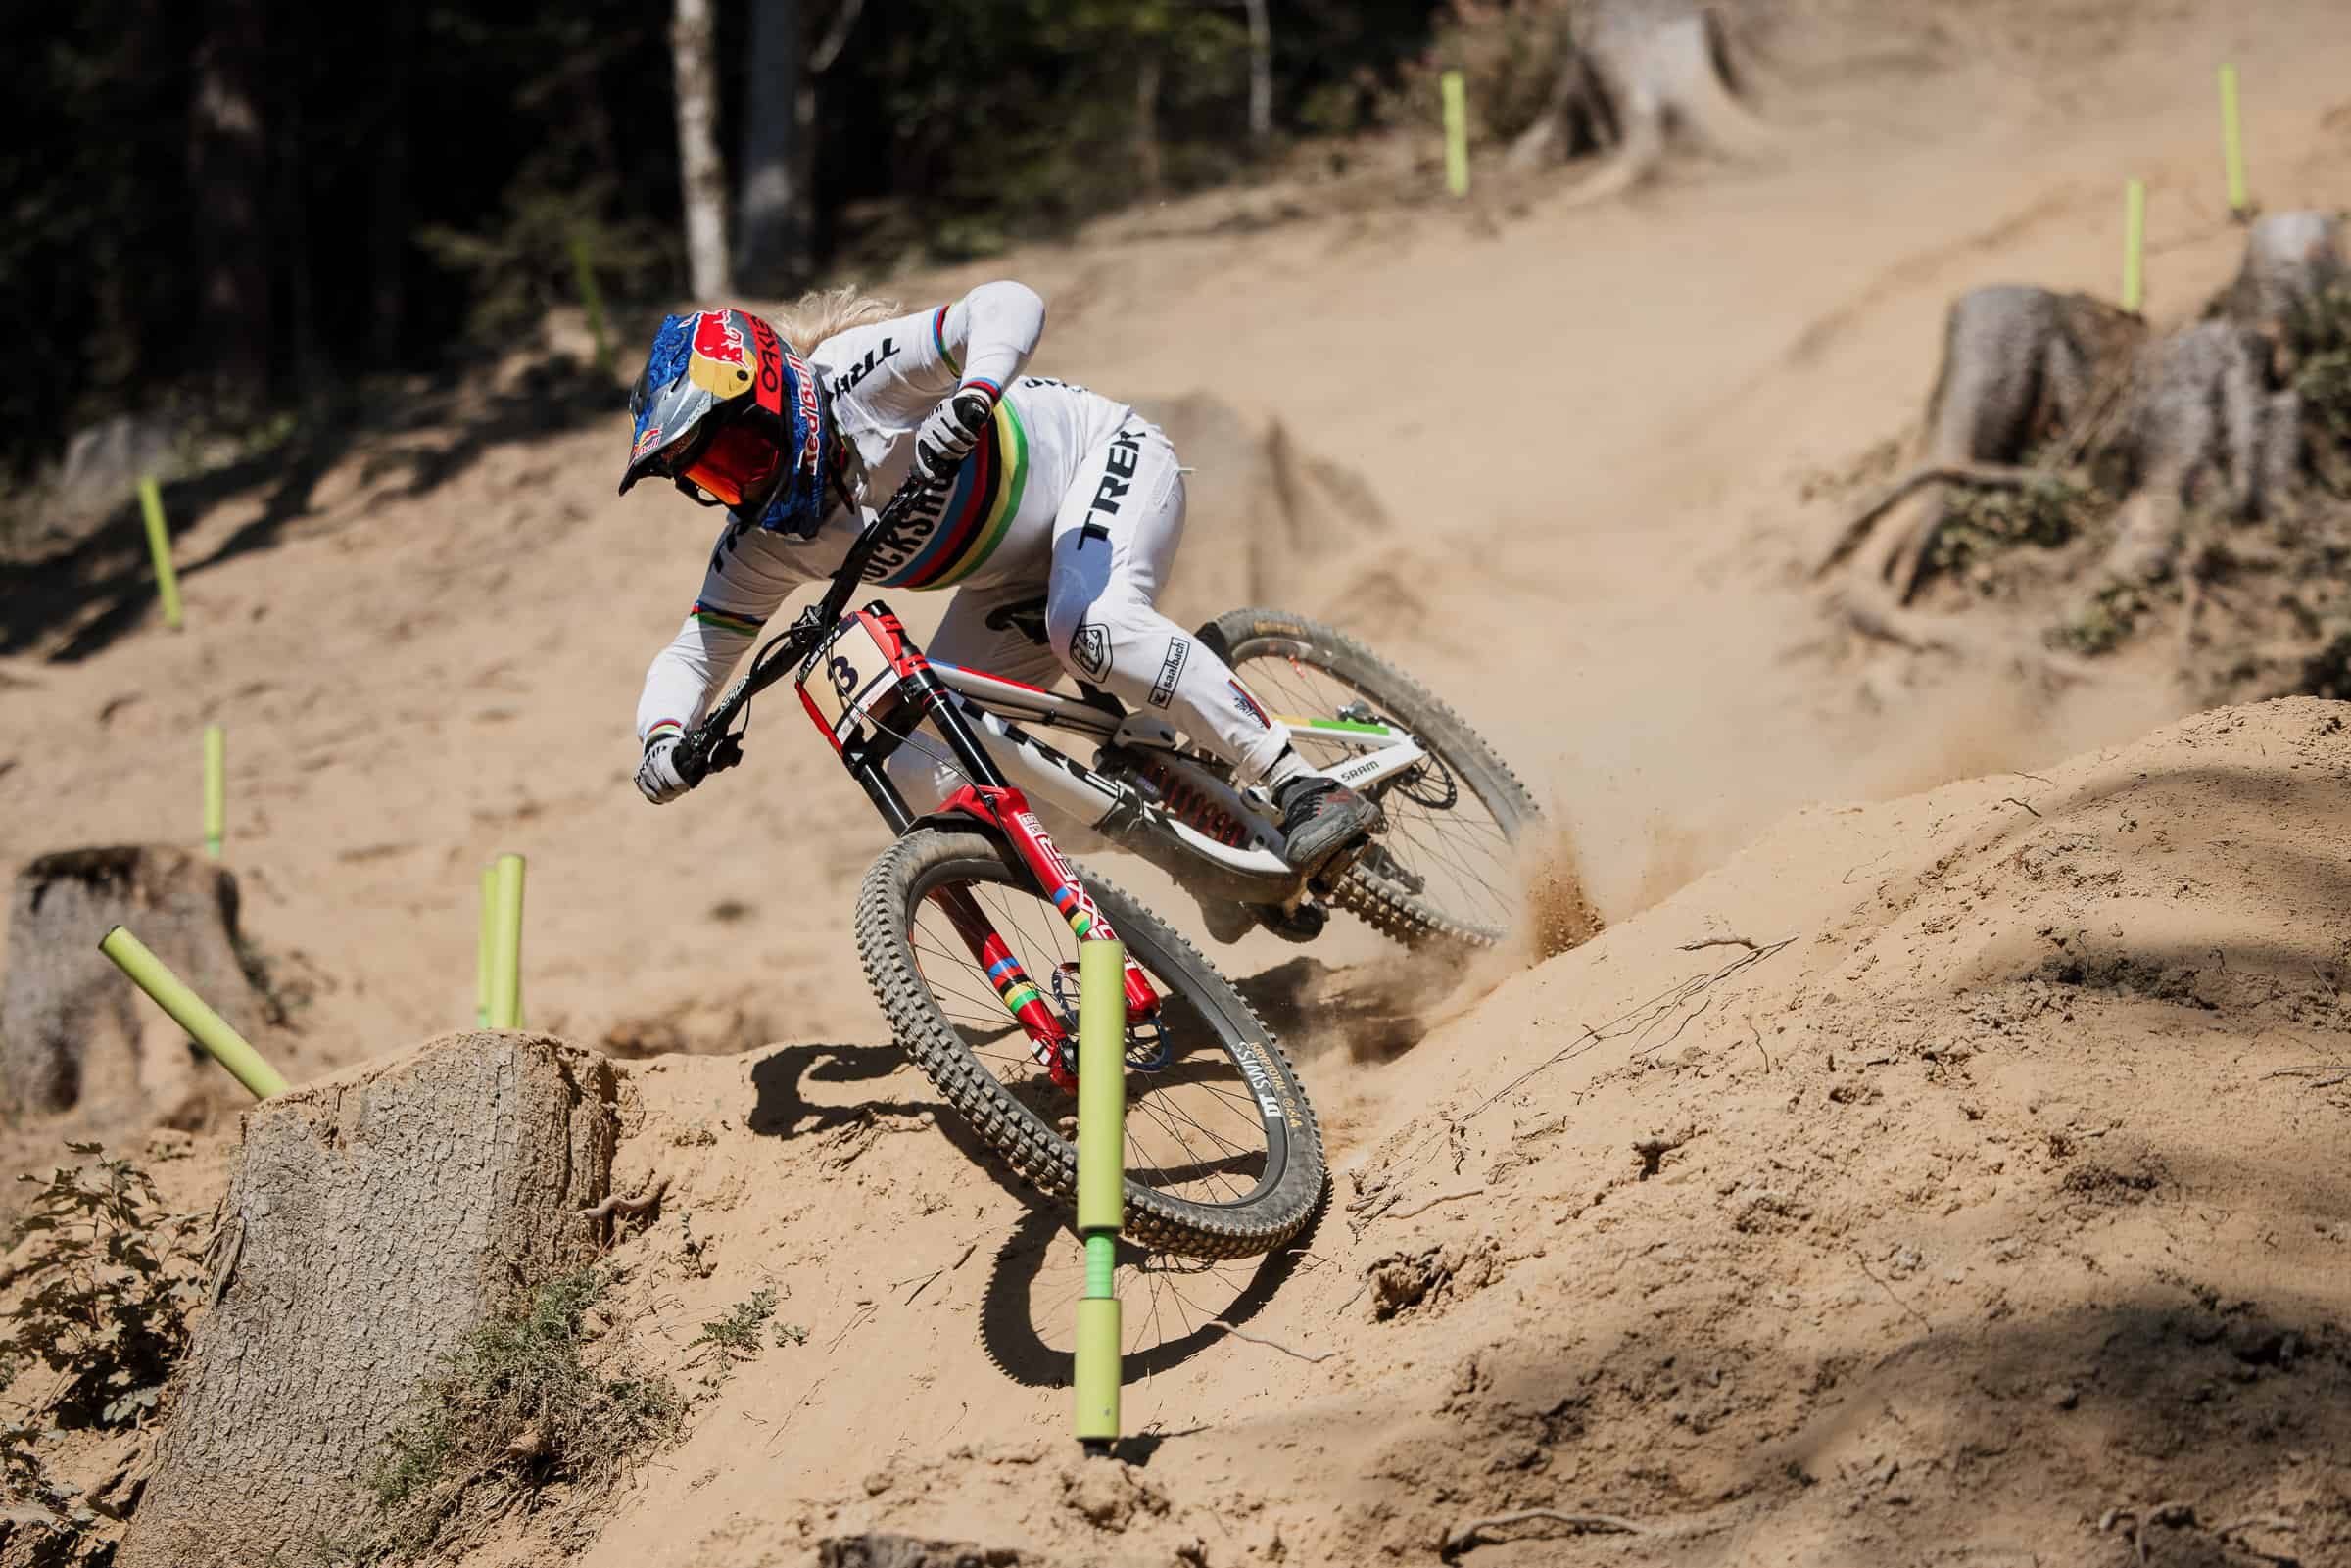 UCI Mountain Bike World Series heads to the States for some high stakes racing